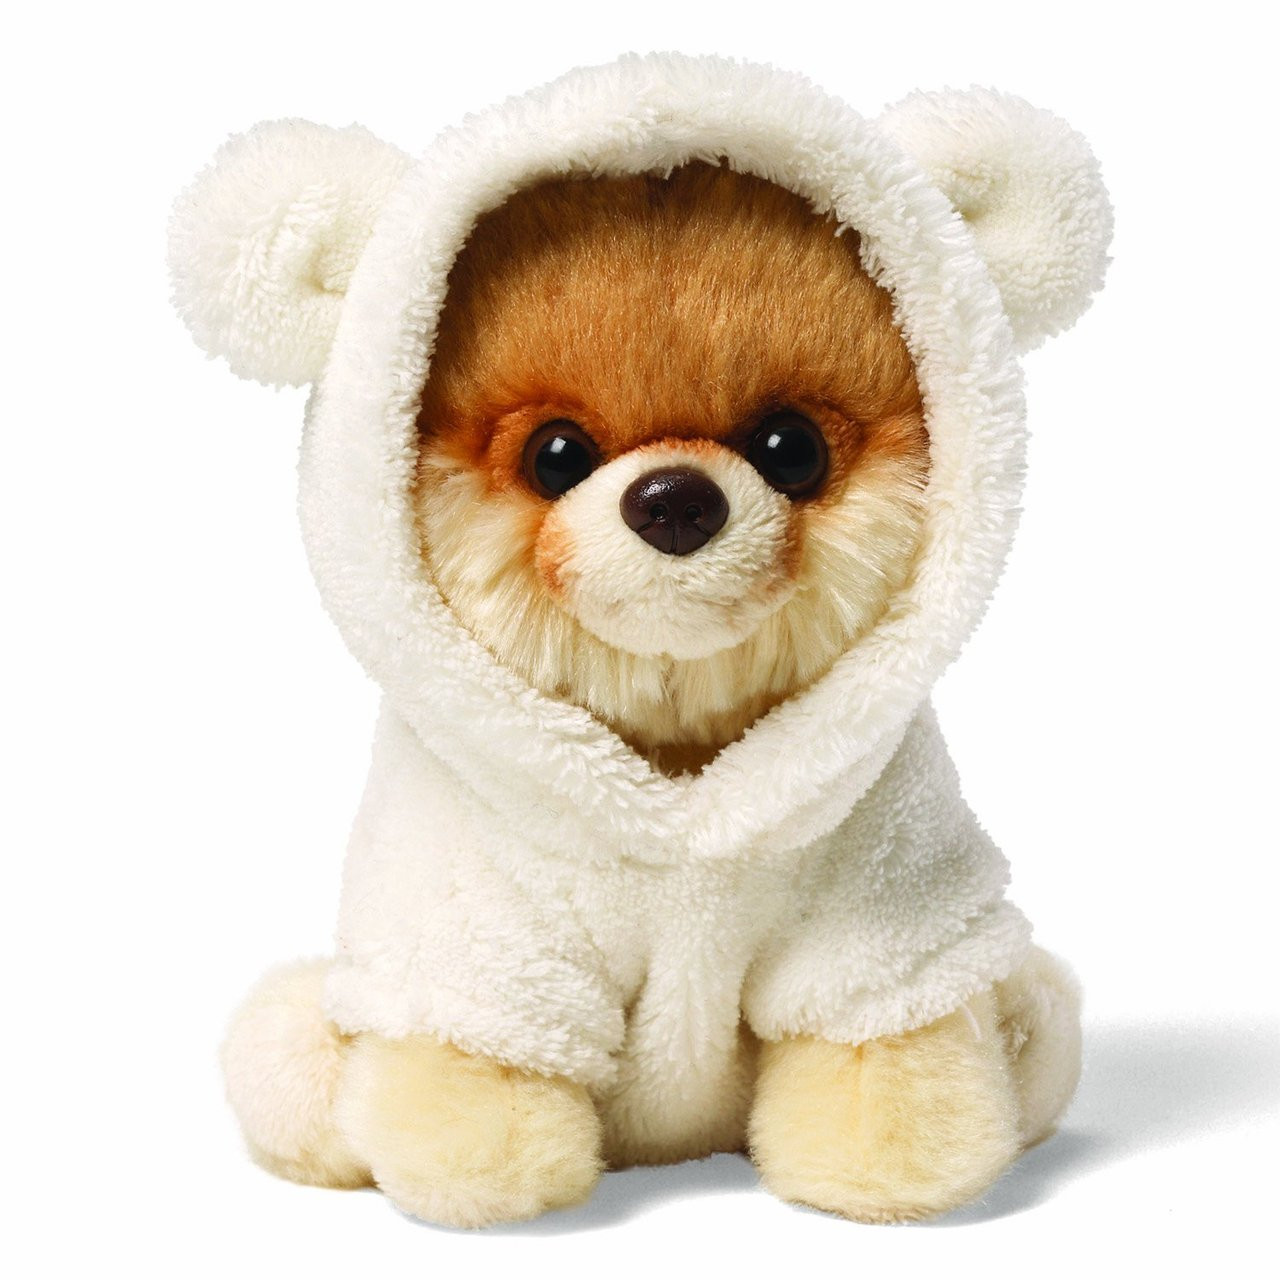 Gund Itty Bitty Boo in Bear Suit - For Moms